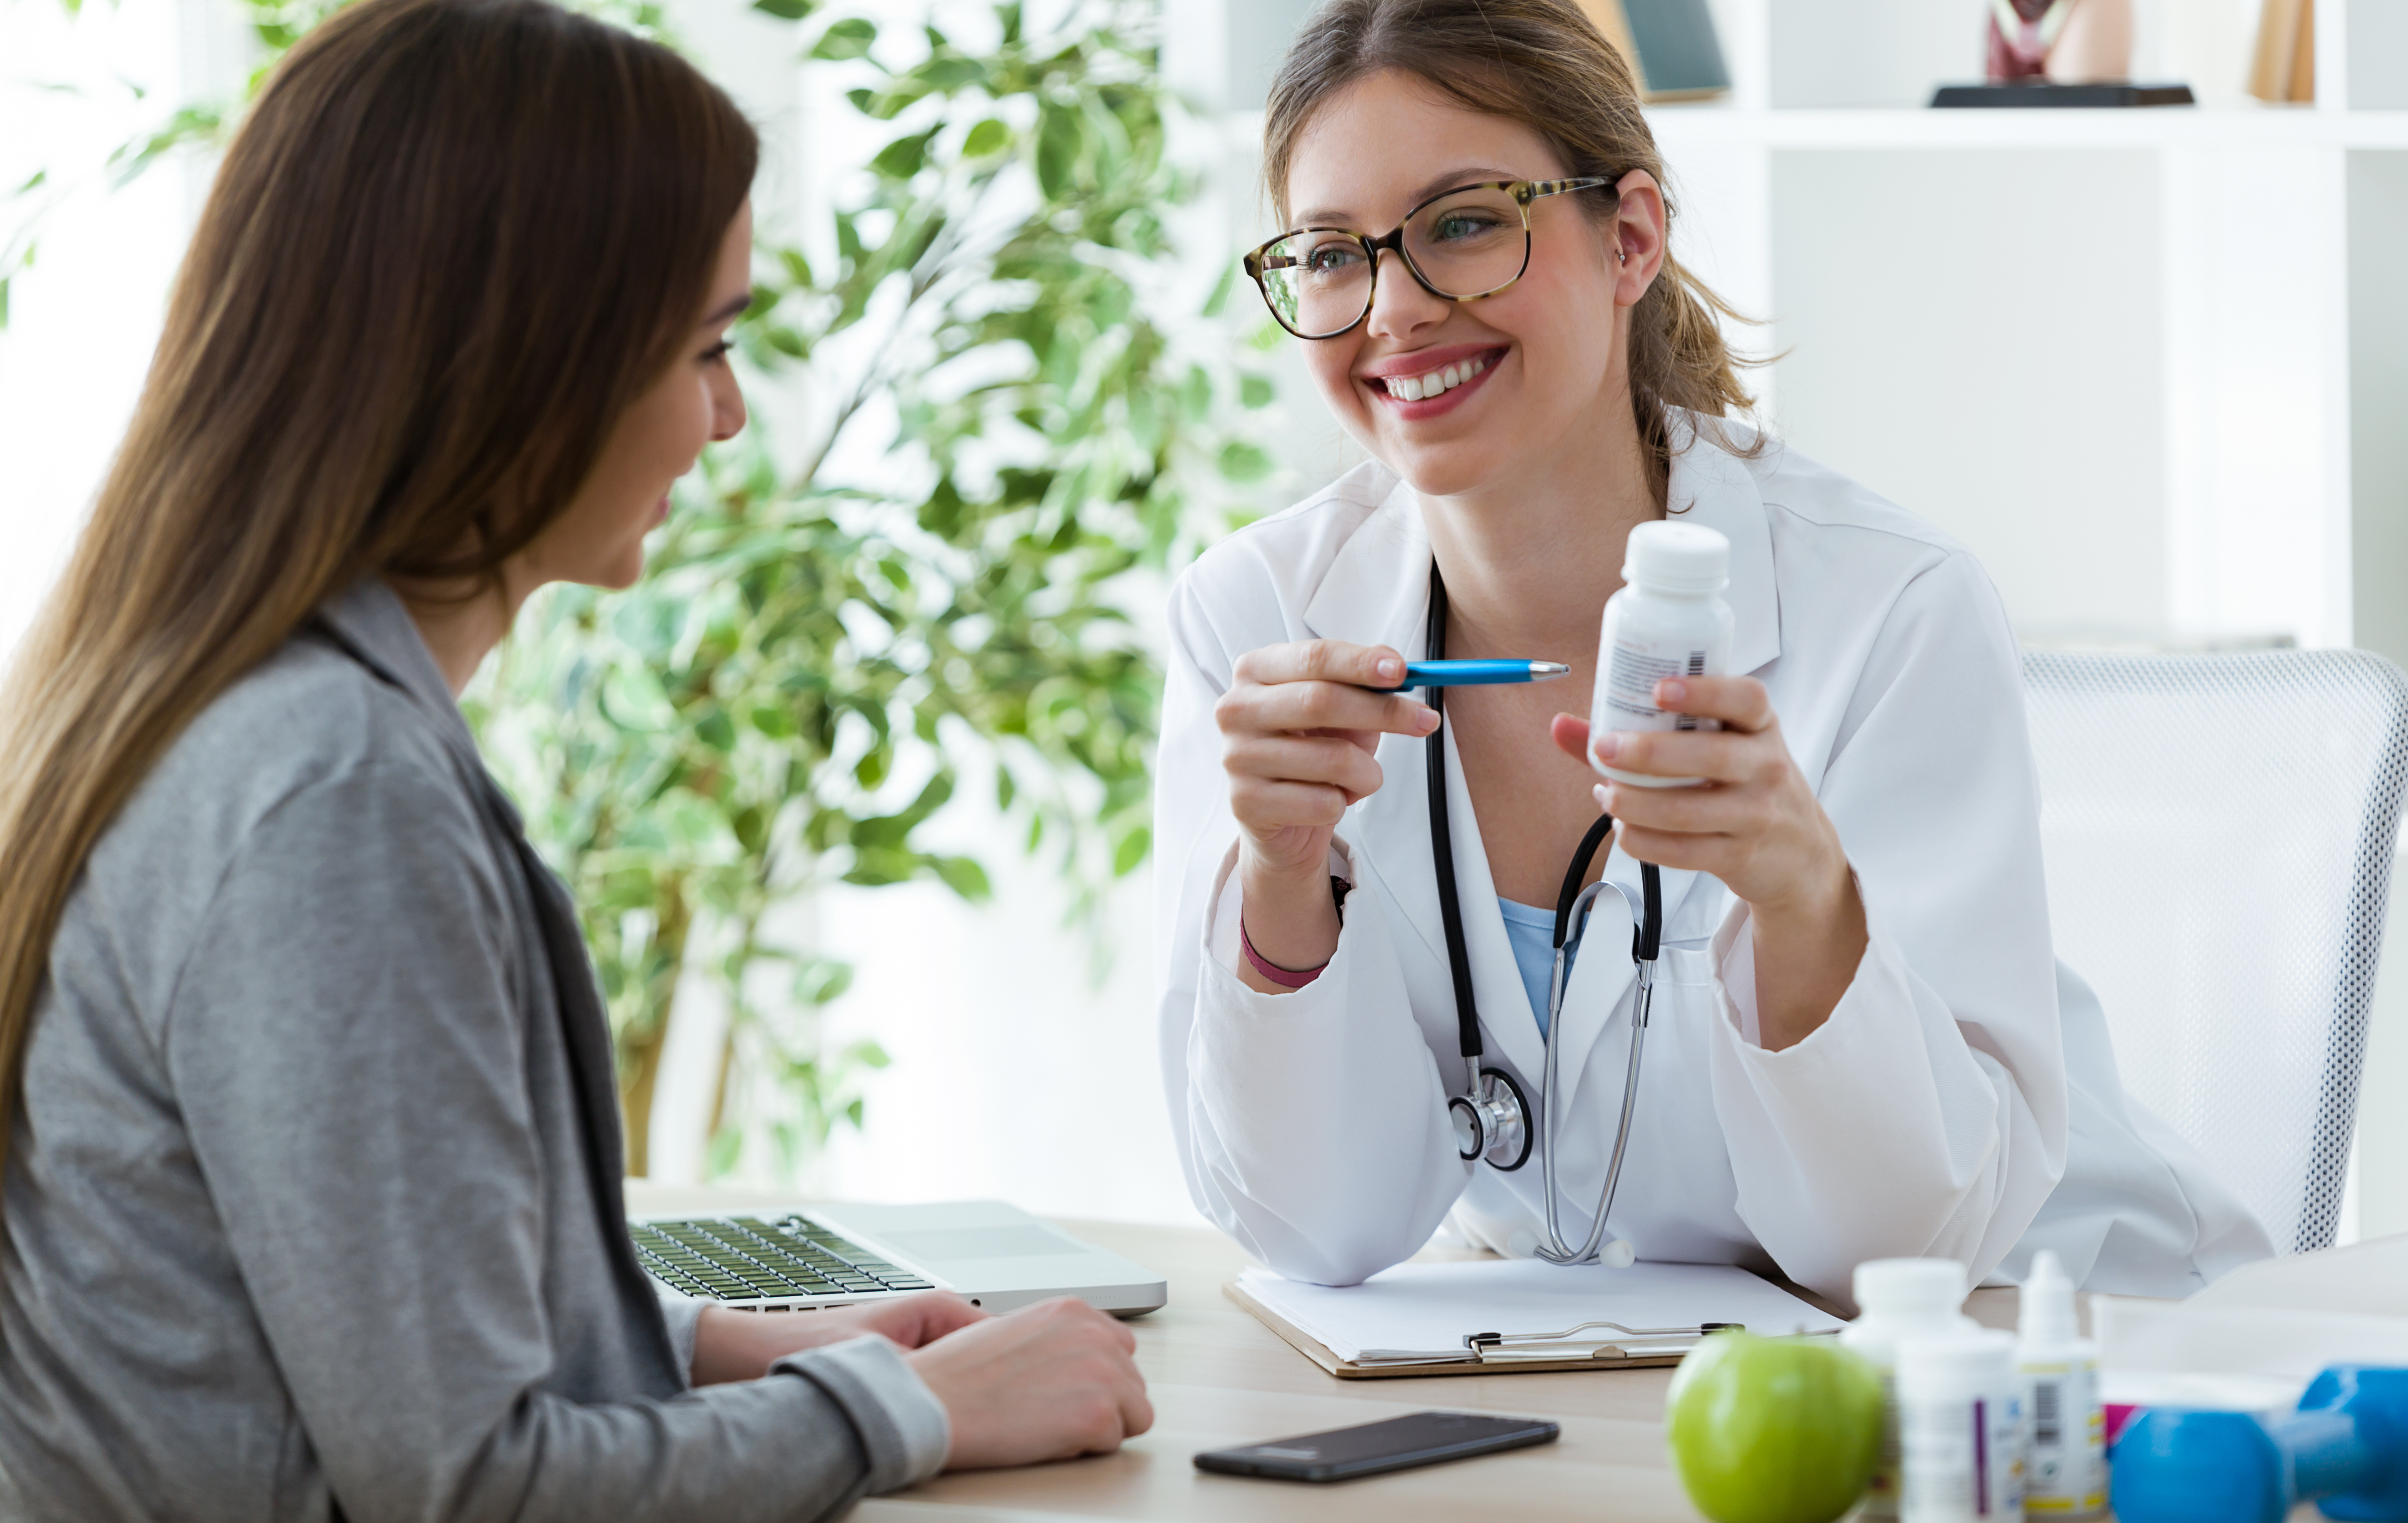 An image showcases a friendly and knowledgeable doctor engaged in a conversation with a female patient at a desk. Both the doctor and the patient are smiling, indicating a positive and supportive environment. The desk is adorned with various supplements and paperwork, suggesting a comprehensive approach to hair loss treatment. The image reflects the hormone replacement therapy clinic's commitment to personalized care, as the doctor discusses available treatment options tailored to the patient's specific needs. It conveys a sense of collaboration, expertise, and a shared goal of addressing female hair loss and restoring confidence in patients.